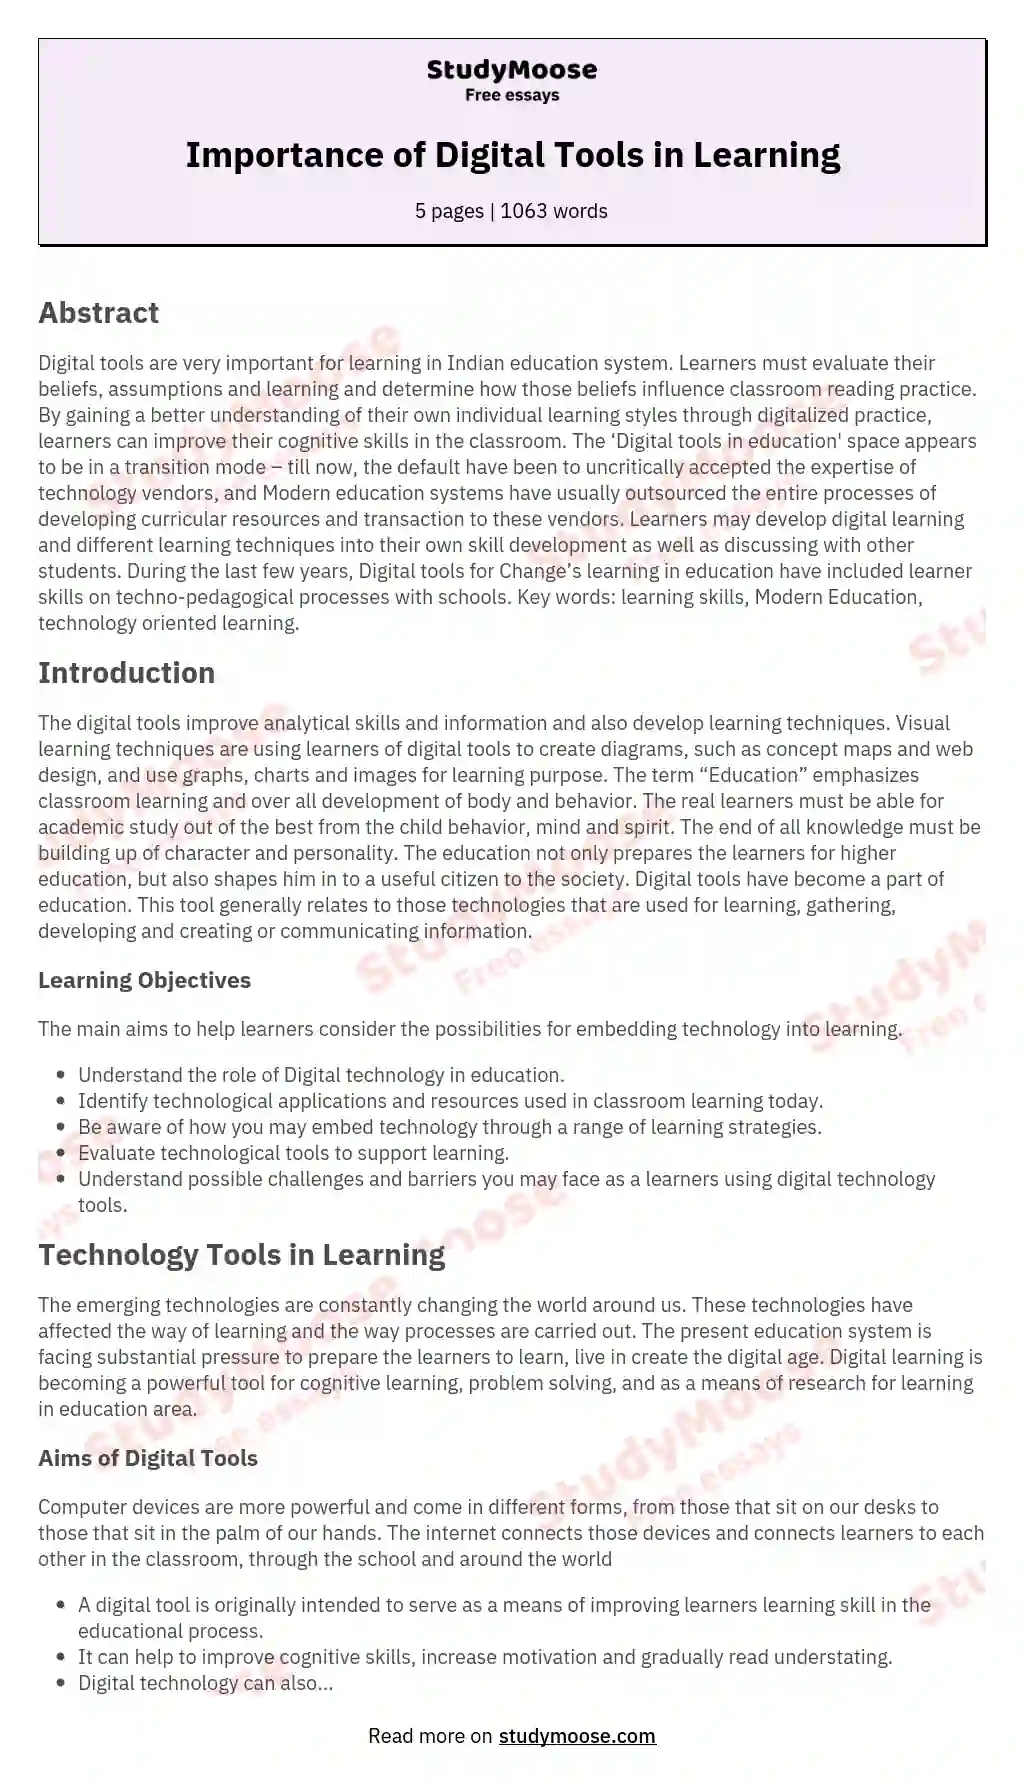 Importance of Digital Tools in Learning essay